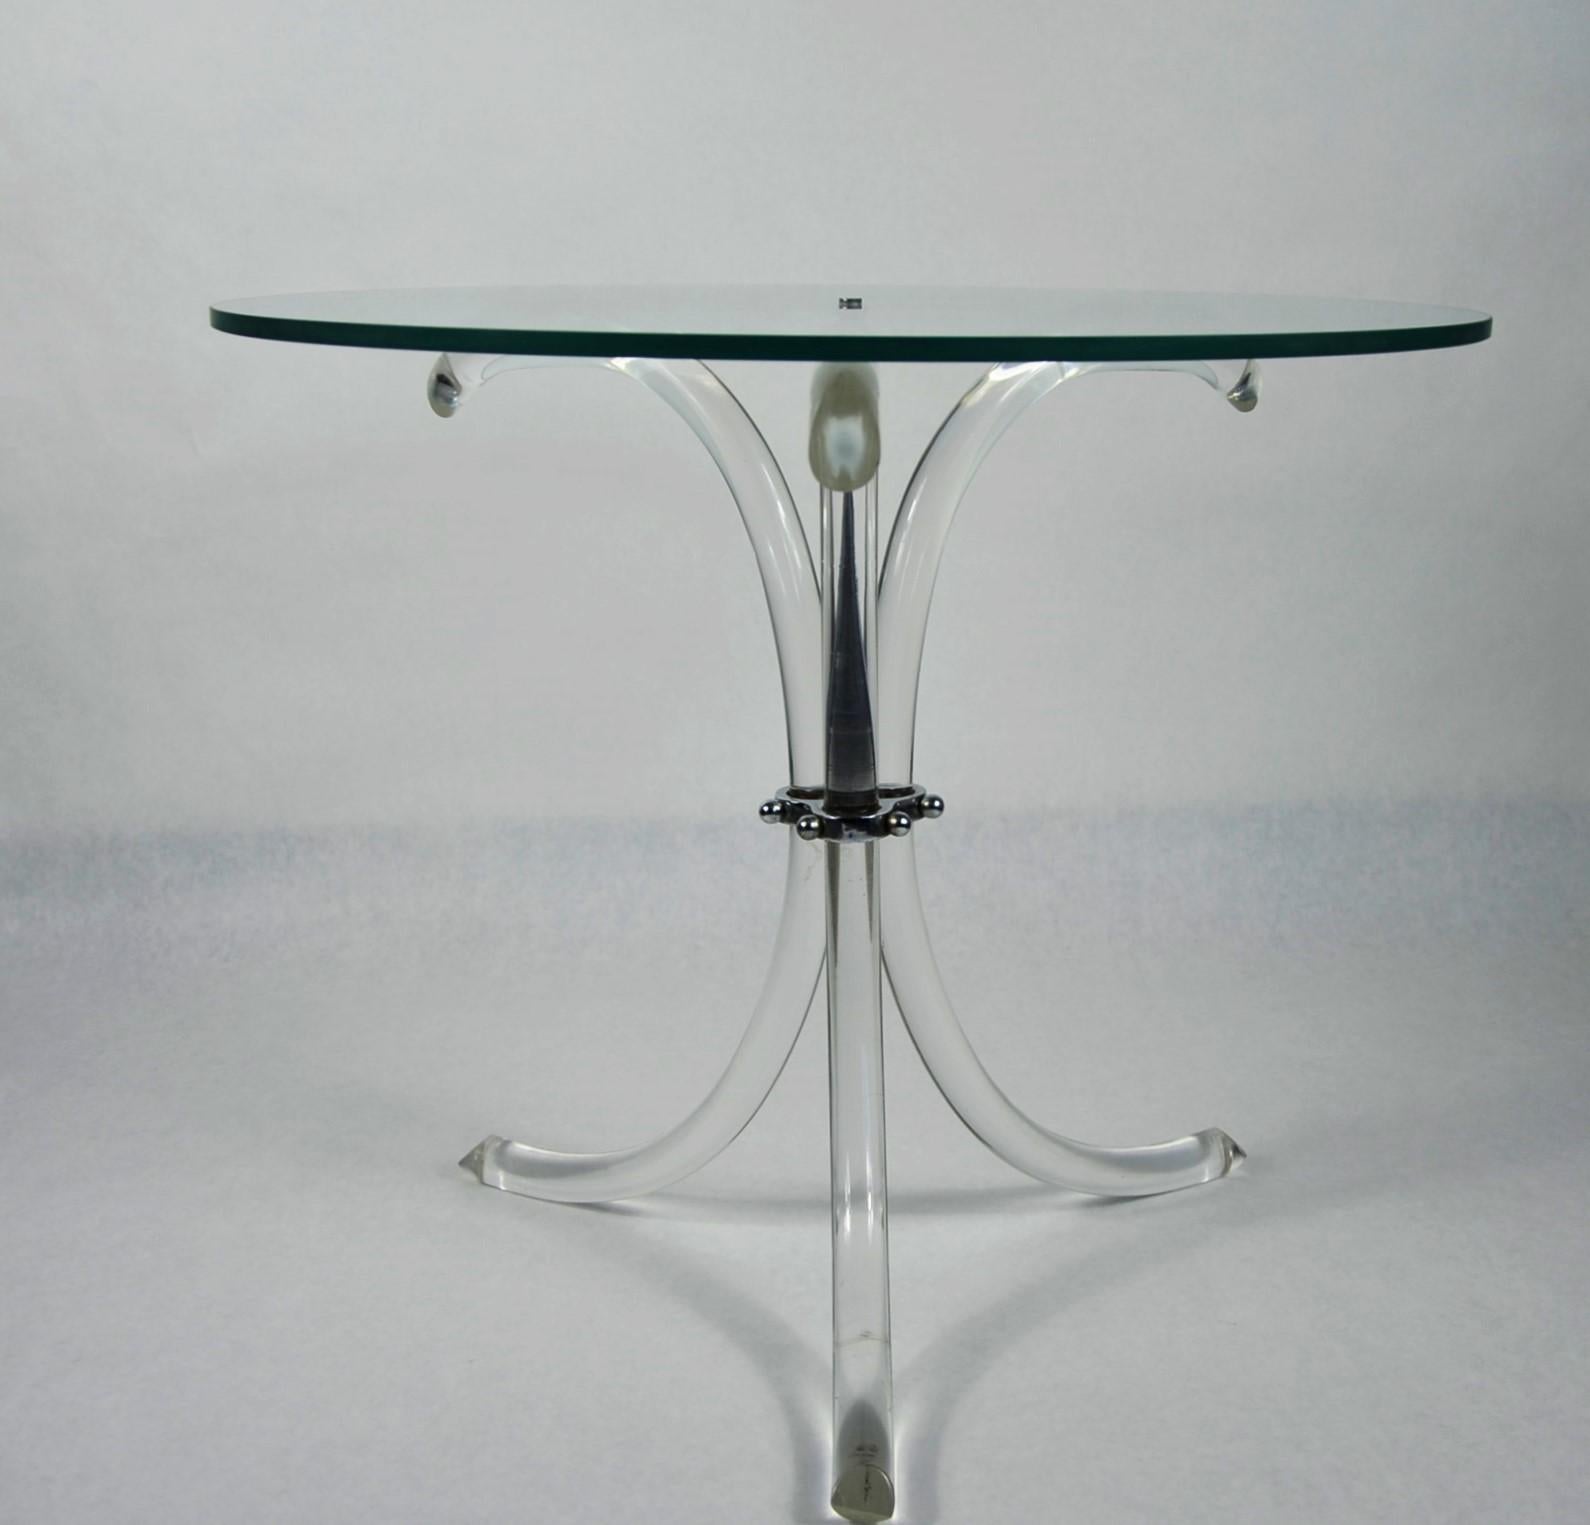 Offered is a Mid-Century Modern Charles Hollis Jones style round glass top, chrome accents and Lucite tripod legs side / end and / or occasional table. Wonderfully sleek and sophisticated design that would blend well with any type of decor. This